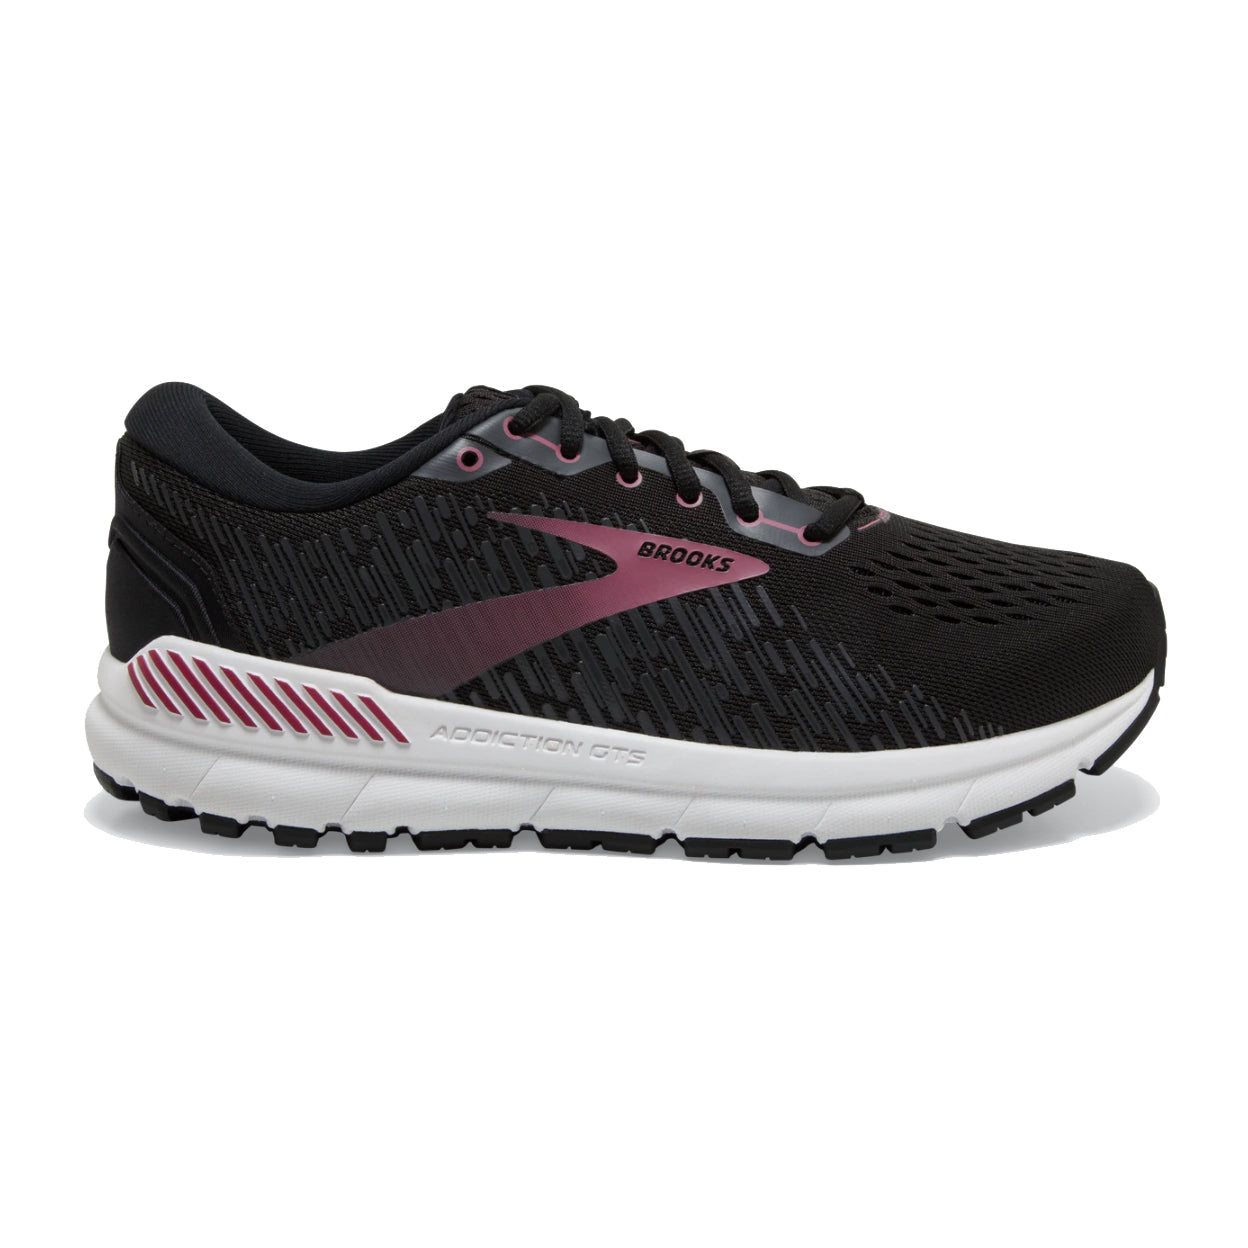 A single Brooks Addiction GTS 15 women's running shoe with black upper and white sole, designed for severe overpronators.